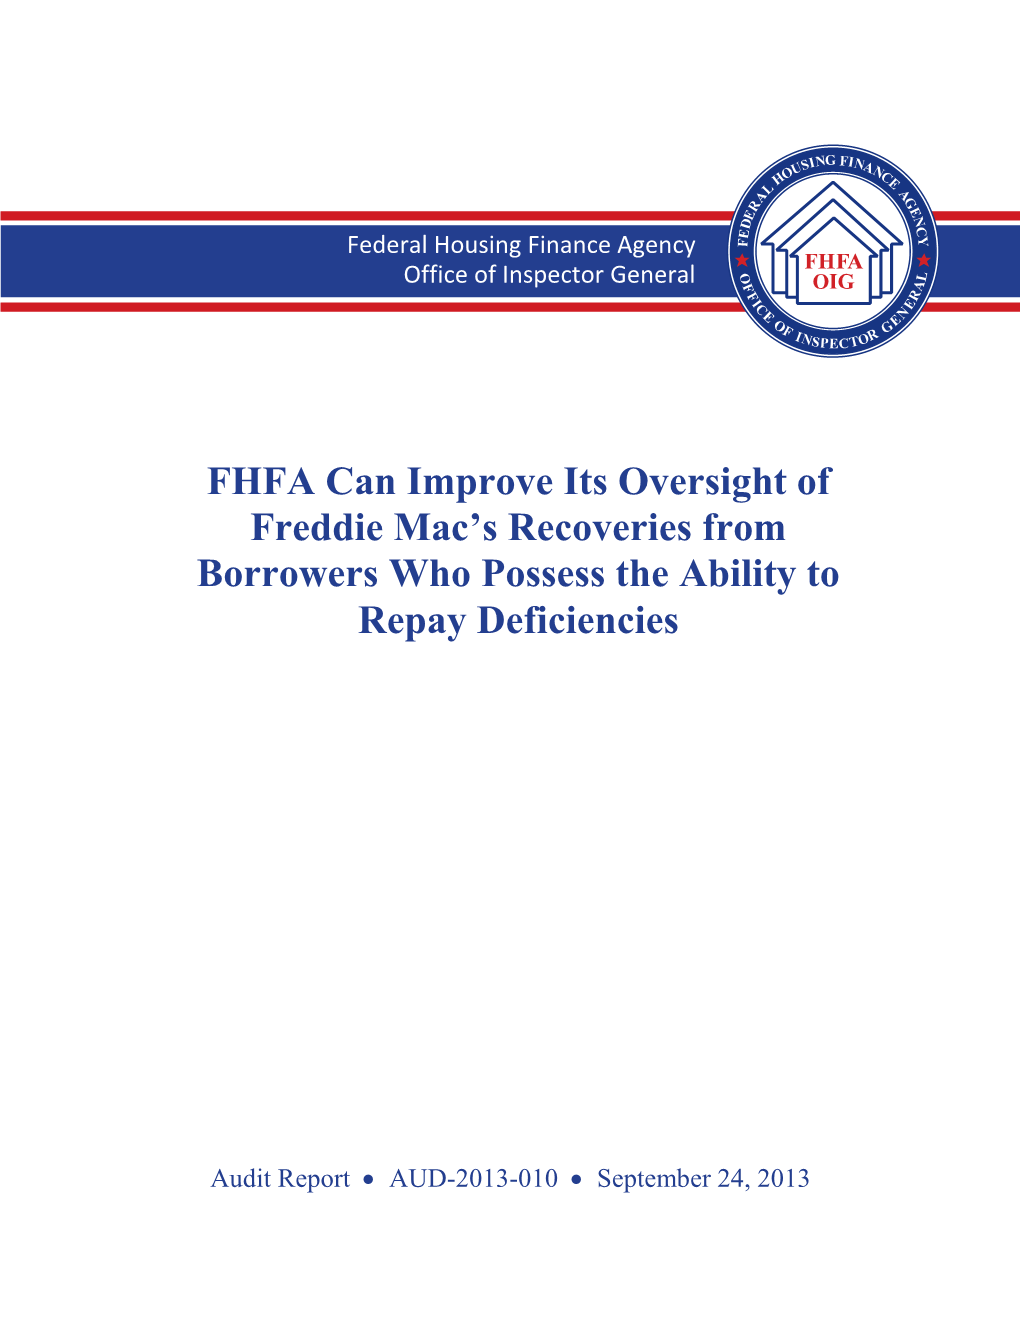 FHFA Can Improve Its Oversight of Freddie Mac's Recoveries From